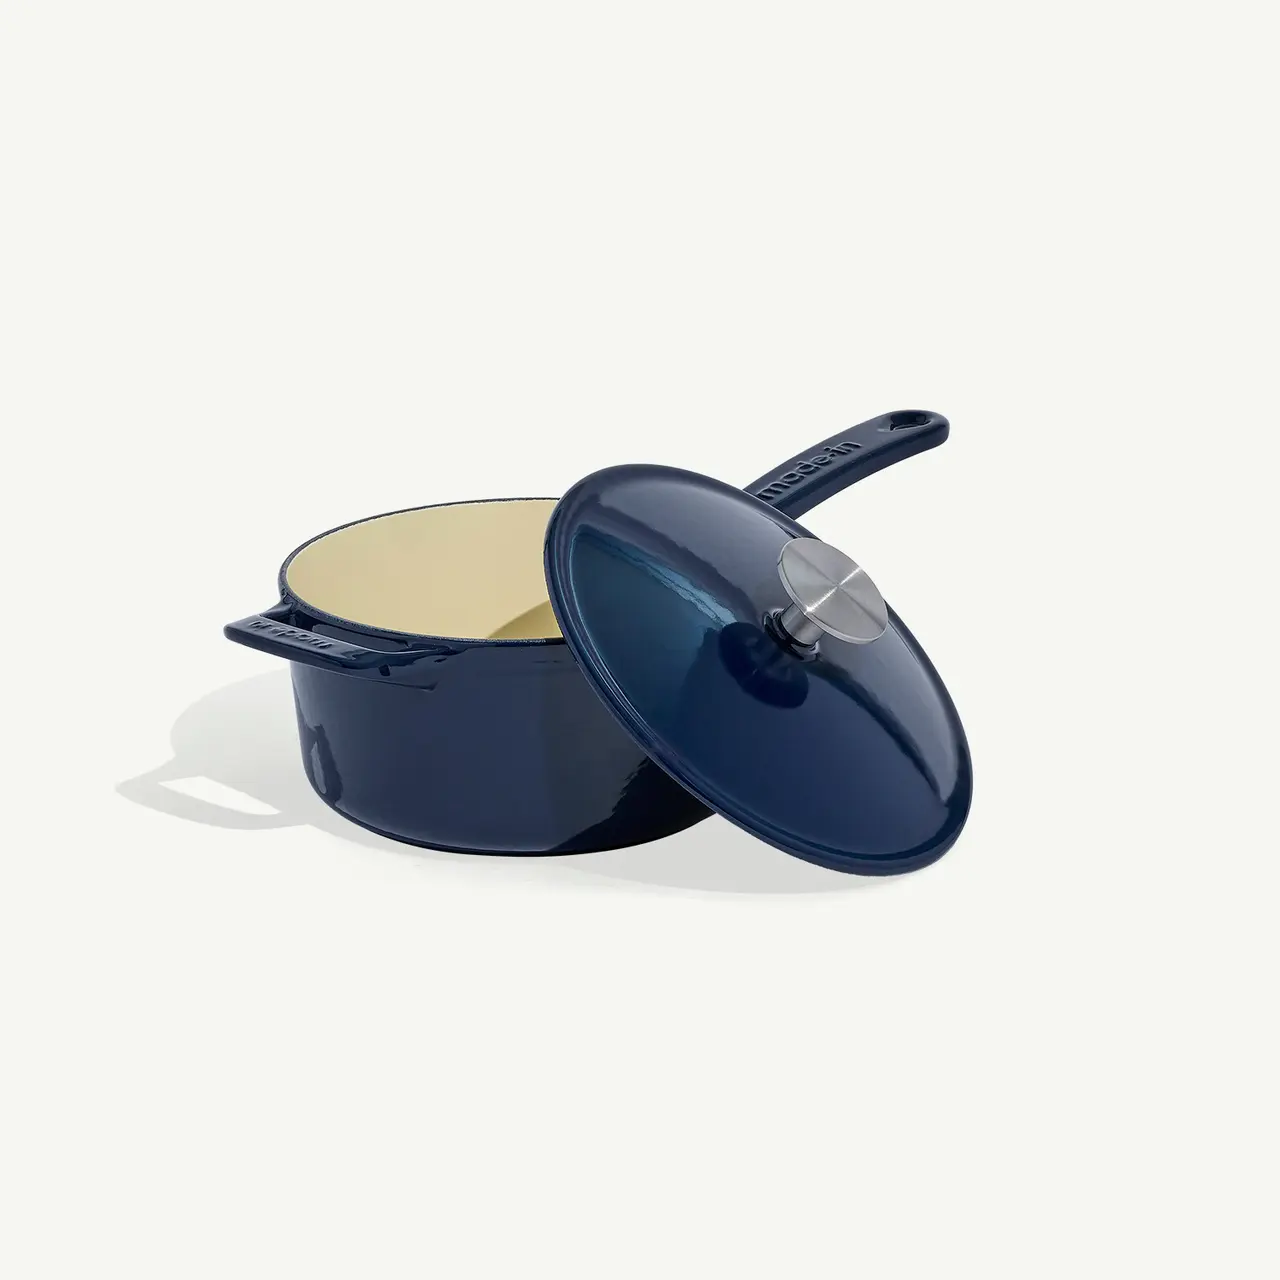 A navy blue enameled saucepan with a matching lid set askew, resting on a light background.